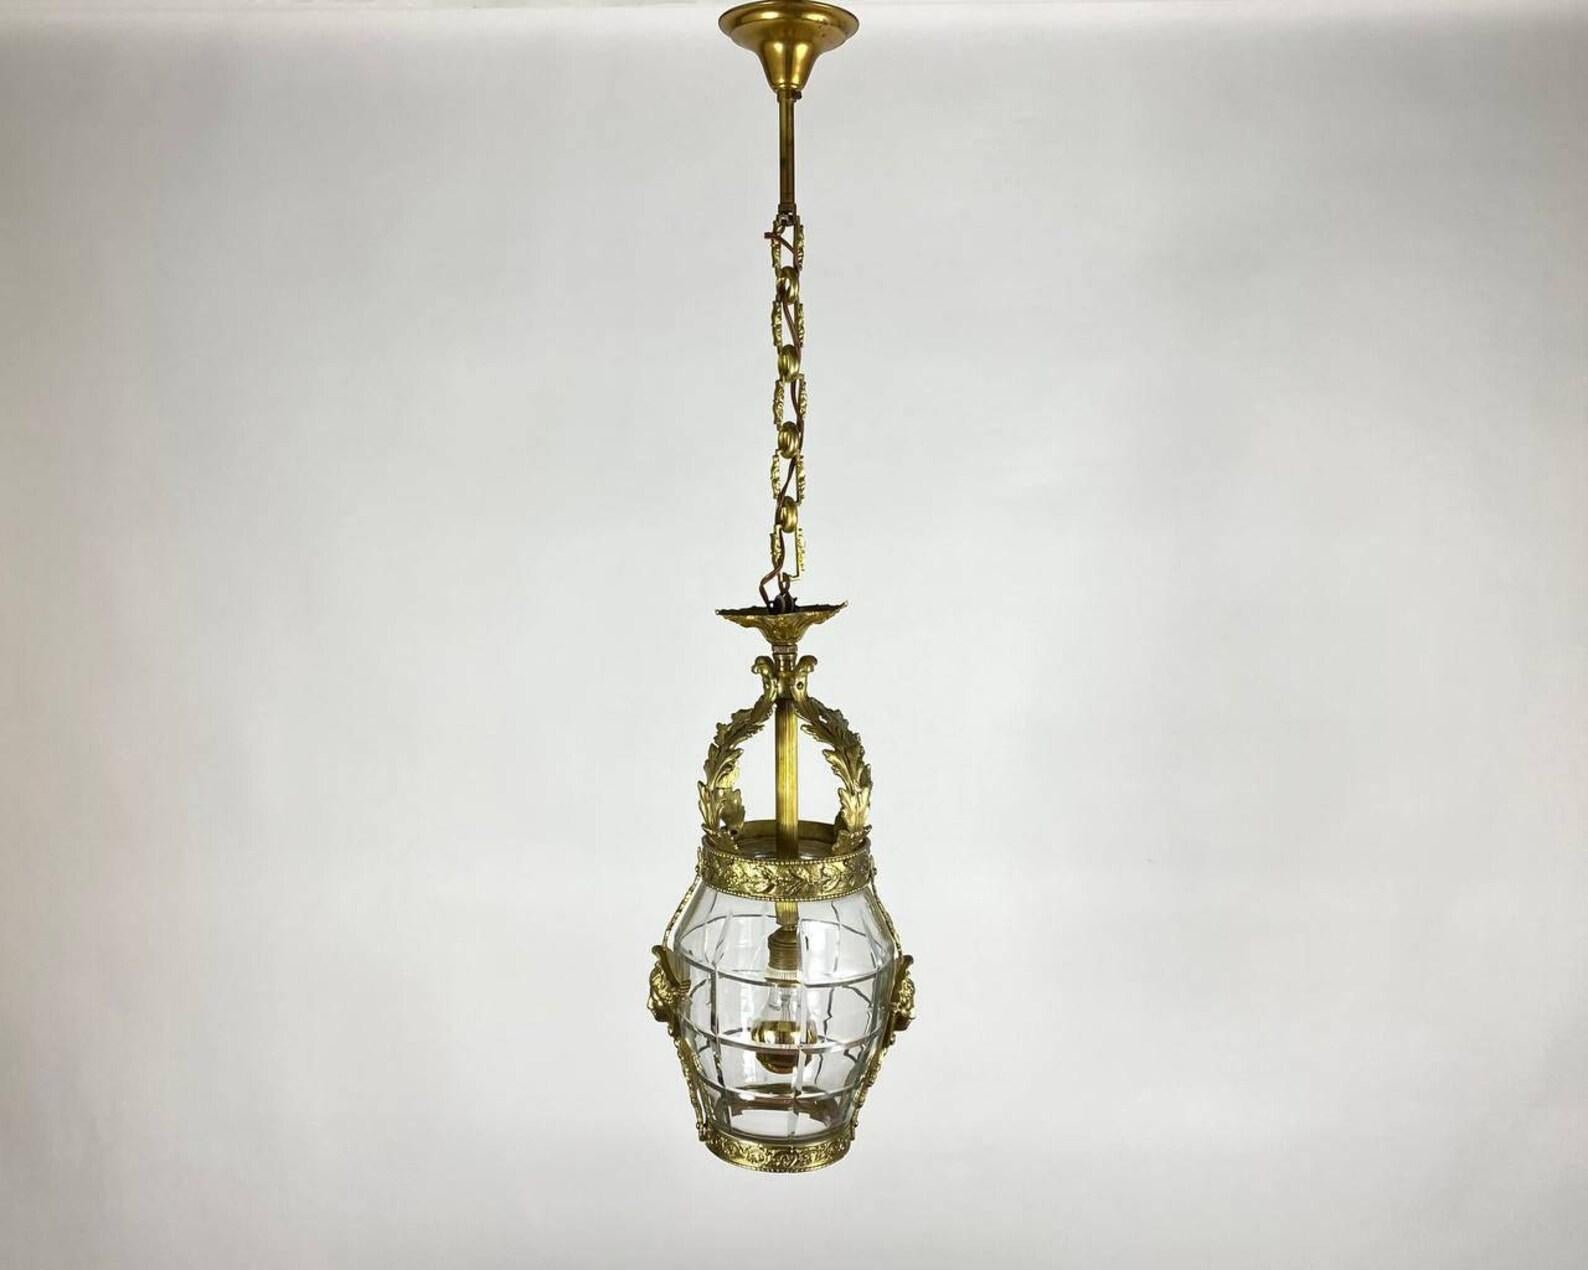 Single-light Pendant Lantern is made of bronze, polished to a mirror shine, covered with gilding. France, 1920's. 

  An ornate French 19th-20th molded glass hanging lantern has elongated molded and cut-glass body surmounted with floral wreaths and